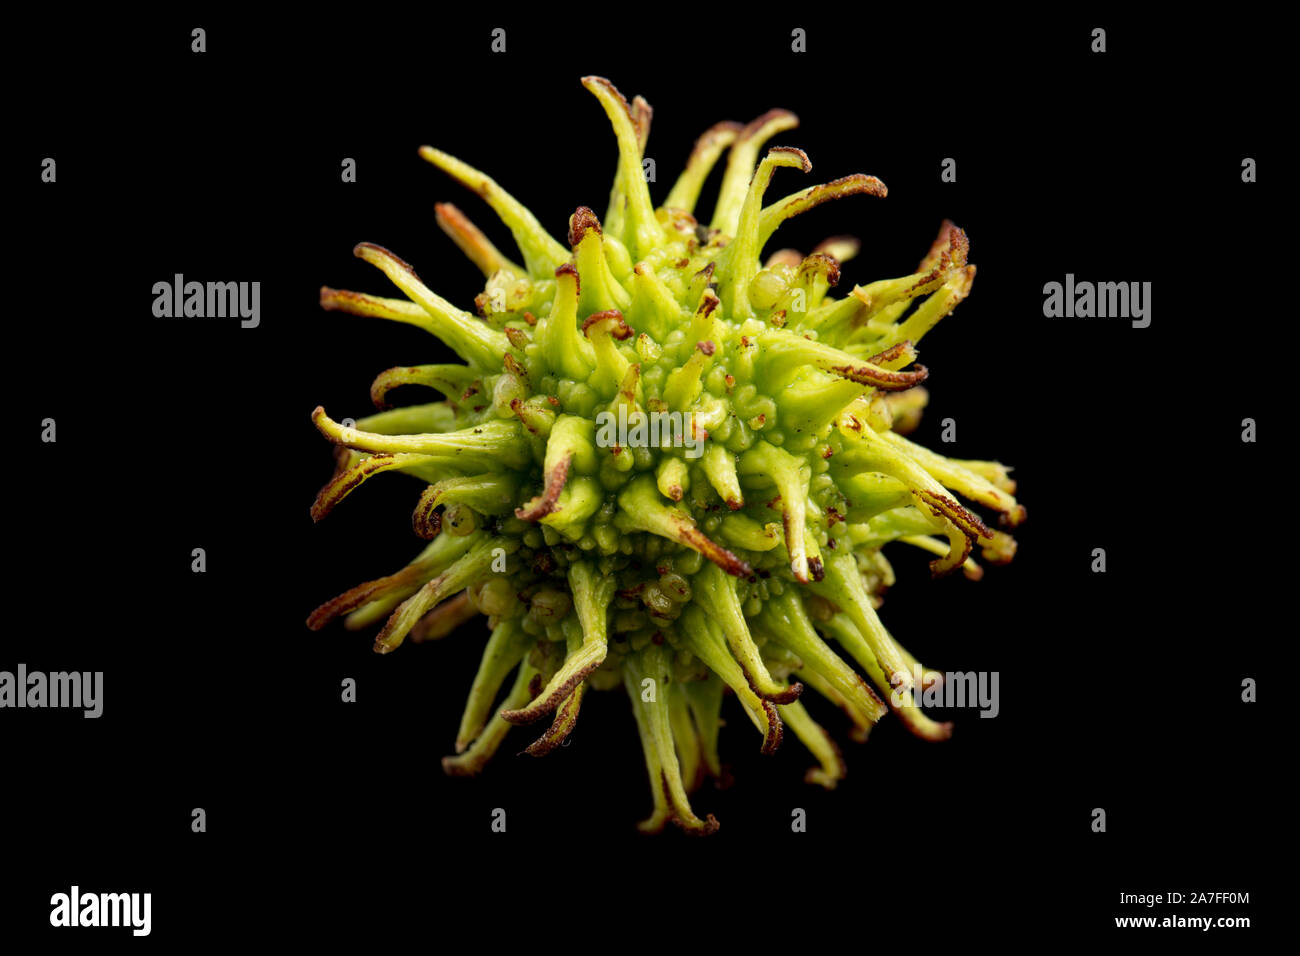 A Single Example Of The Fruit Of The American Sweetgum Tree Liquidamber Styraciflua Photographed Against A Black Background The Spiky Fruits Contai Stock Photo Alamy